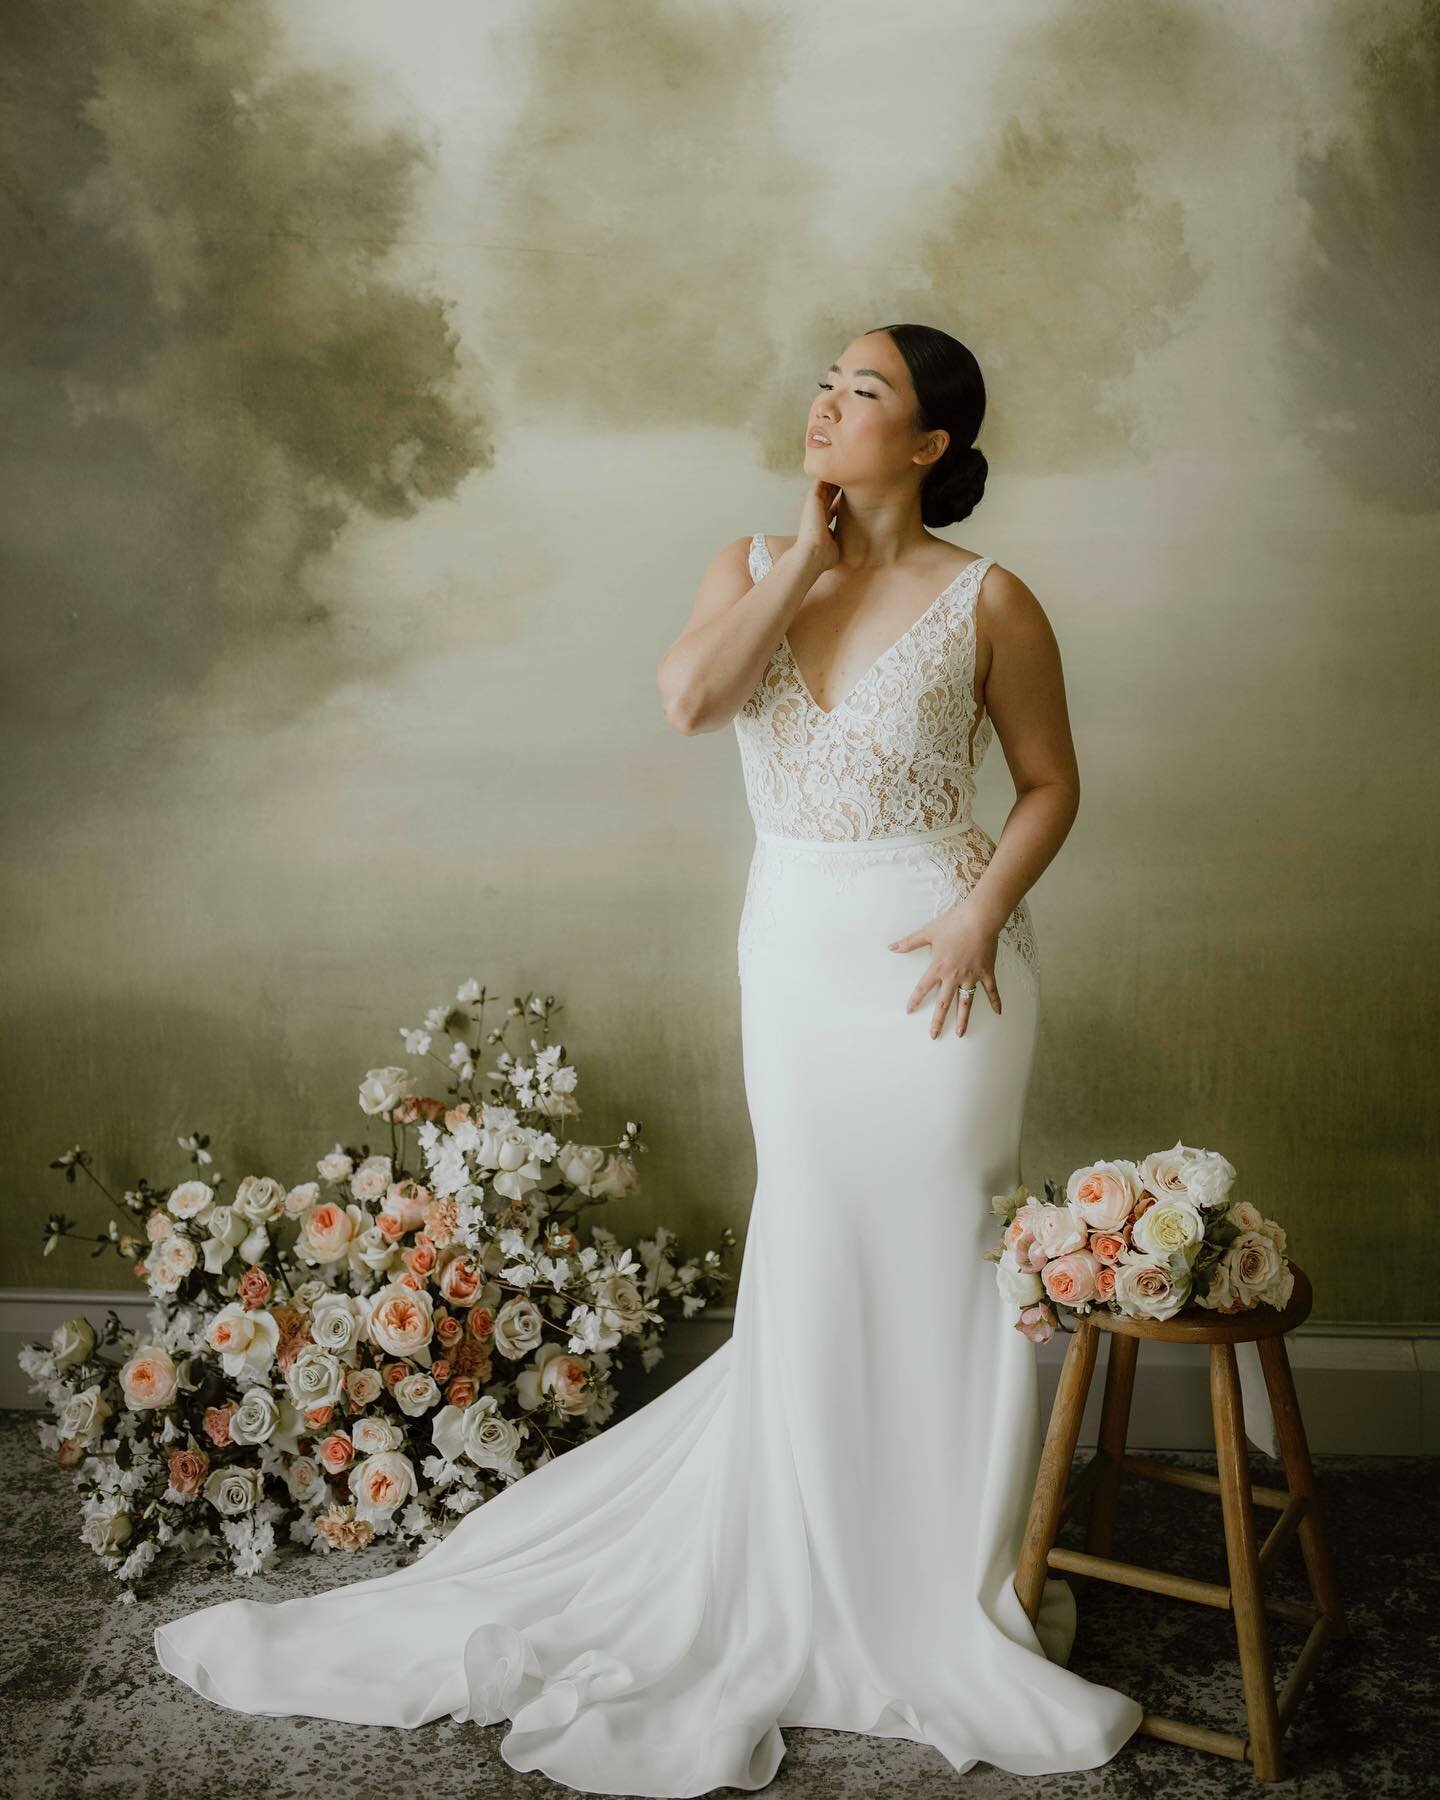 We had the most incredible shoot with some of our favorite new gowns last week, and you won&rsquo;t believe how beautiful these photographs turned out! We recently hired @ashtynn.bree to the Bustle team, and her work truly speaks for itself. These @b